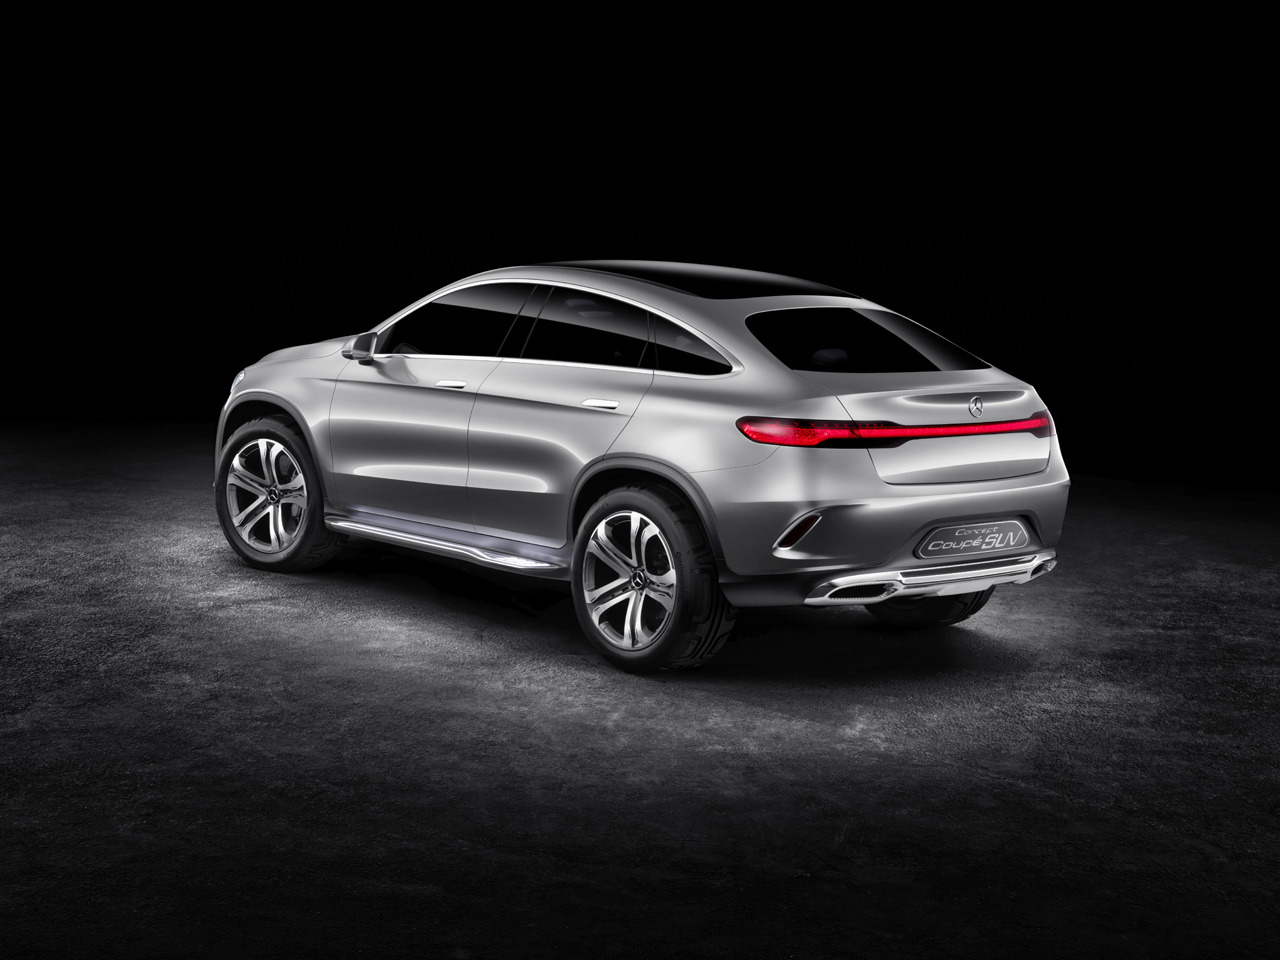 Mercedes Concept Coupe SUV Revealed in Beijing Motor Show